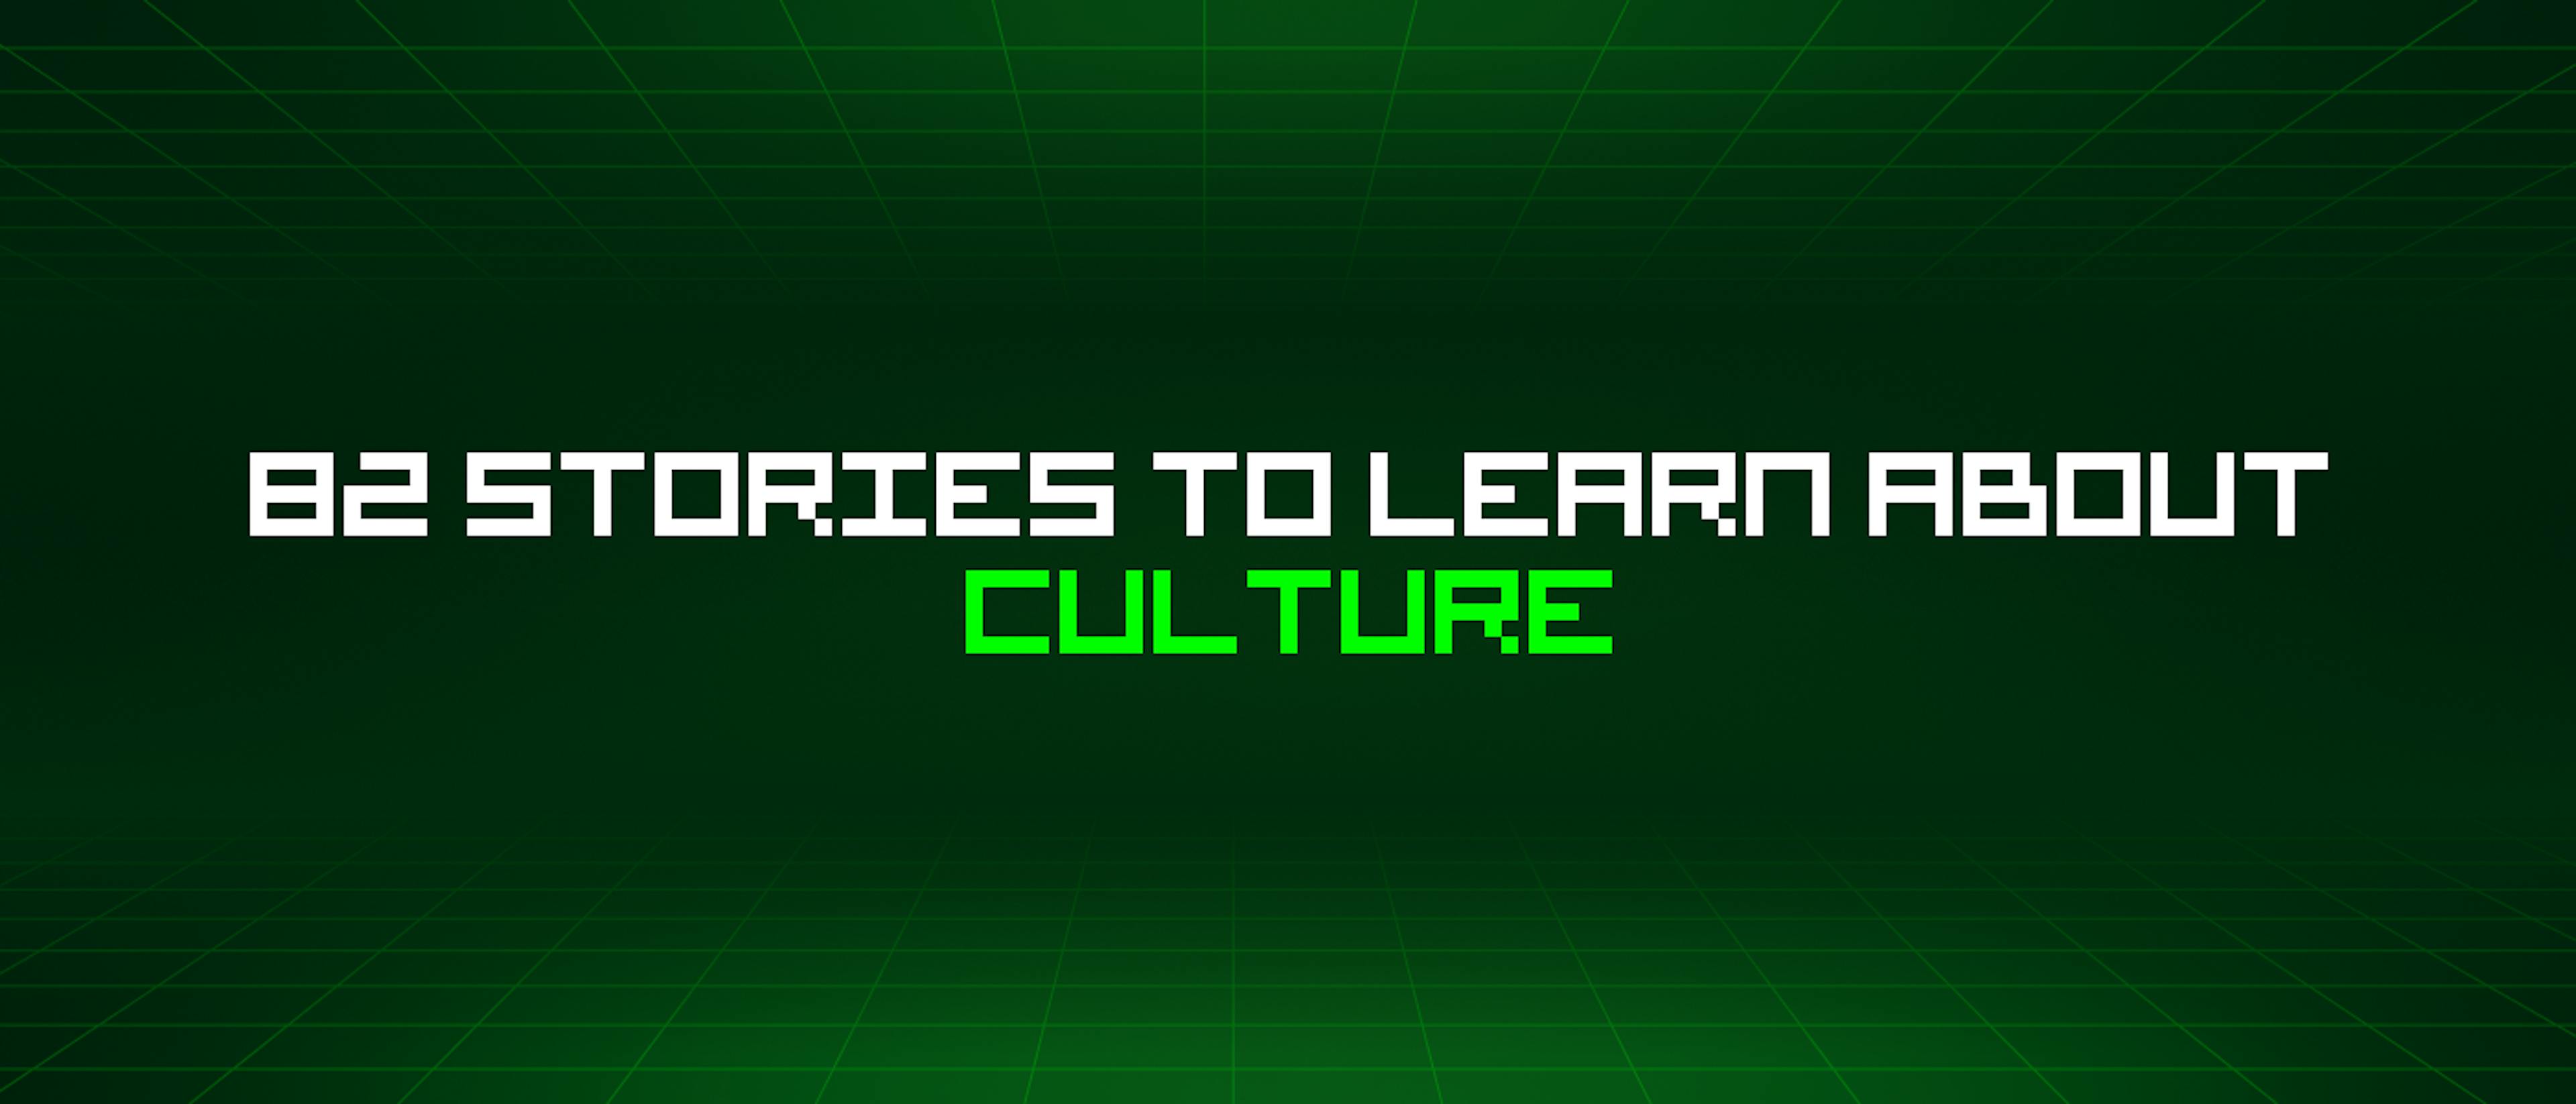 featured image - 82 Stories To Learn About Culture